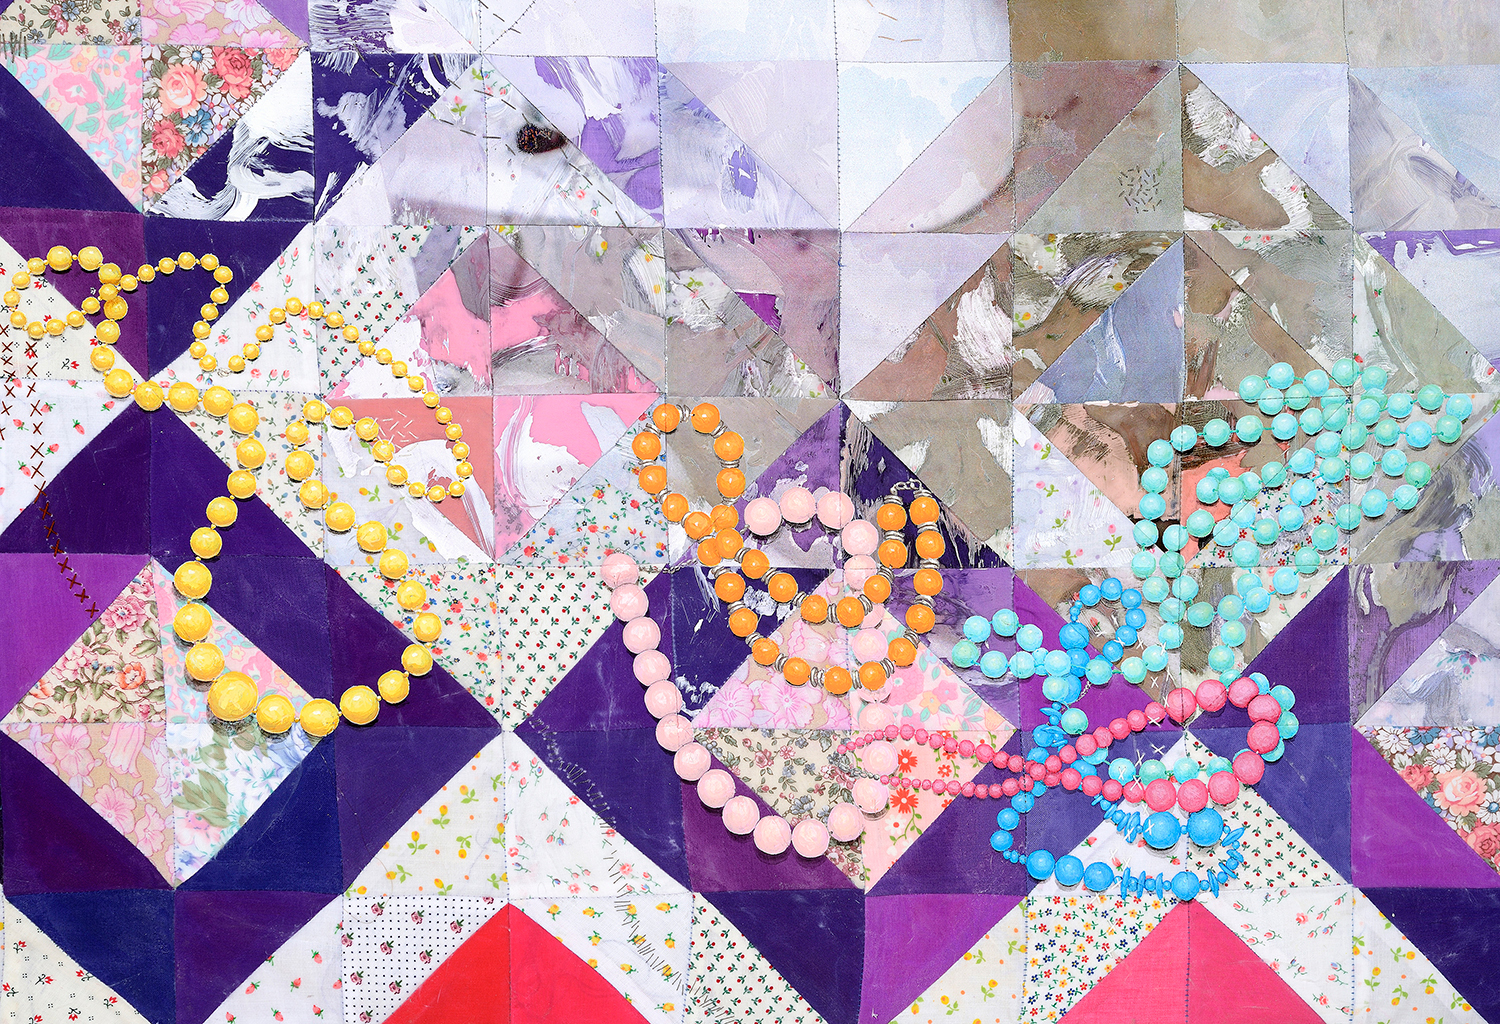 Jeana Eve Klein, Detail of The End of Romance, 2014. Mixed media quilt (Digital printing, acrylic paint and dye on recycled fabric; machine-pieced and hand-quilted), 64 x 52 in.